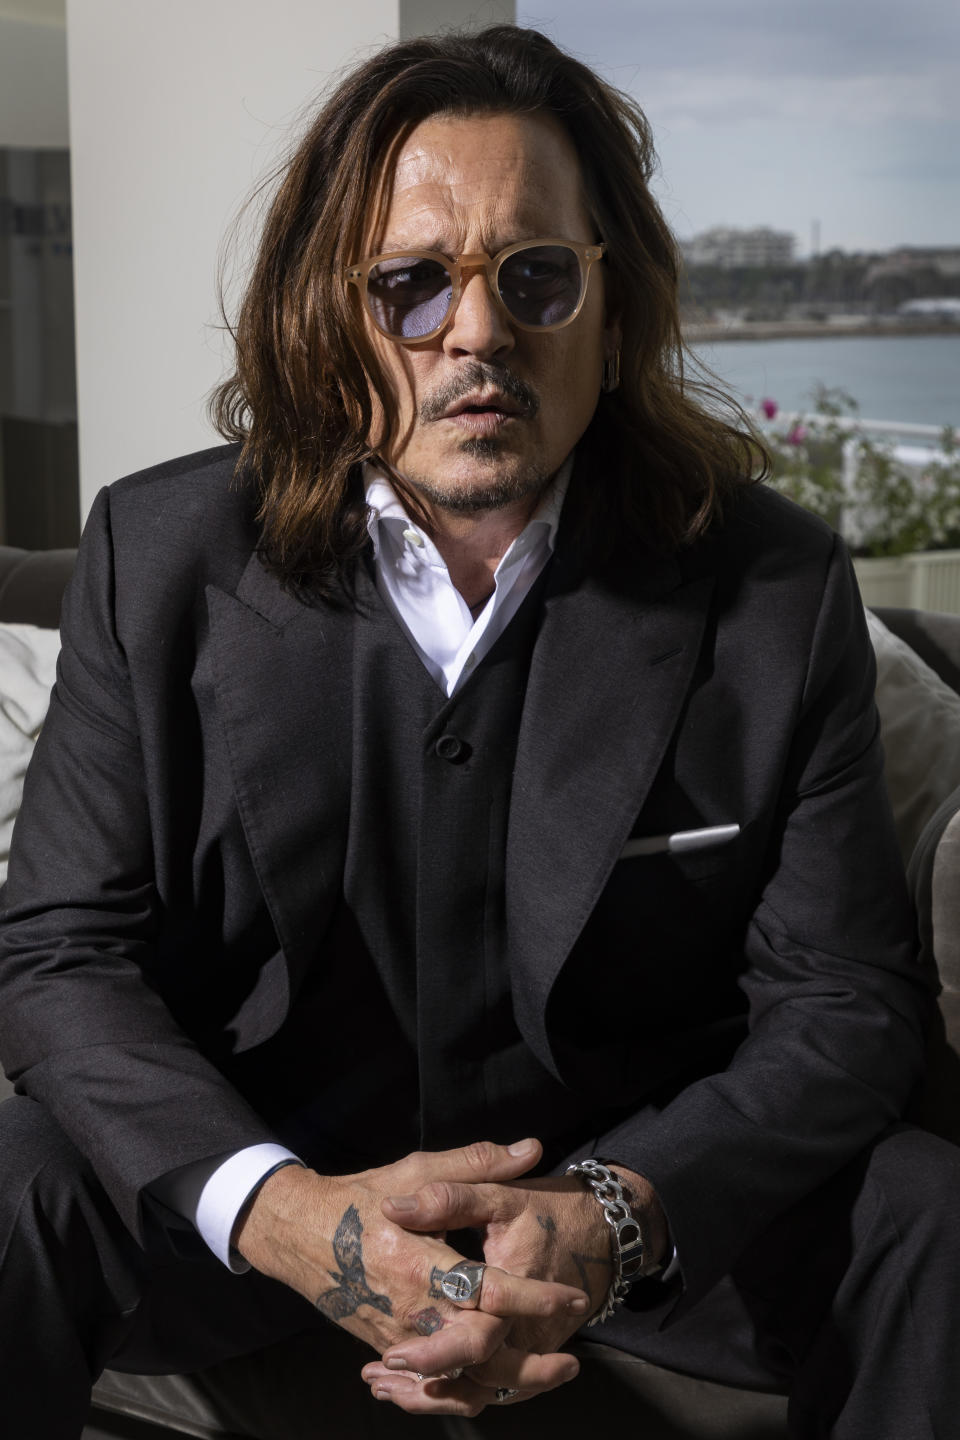 Johnny Depp poses for portrait photographs for the film 'Jeanne du Barry', at the 76th international film festival, Cannes, southern France, Wednesday, May 17, 2023. (Photo by Joel C Ryan/Invision/AP)